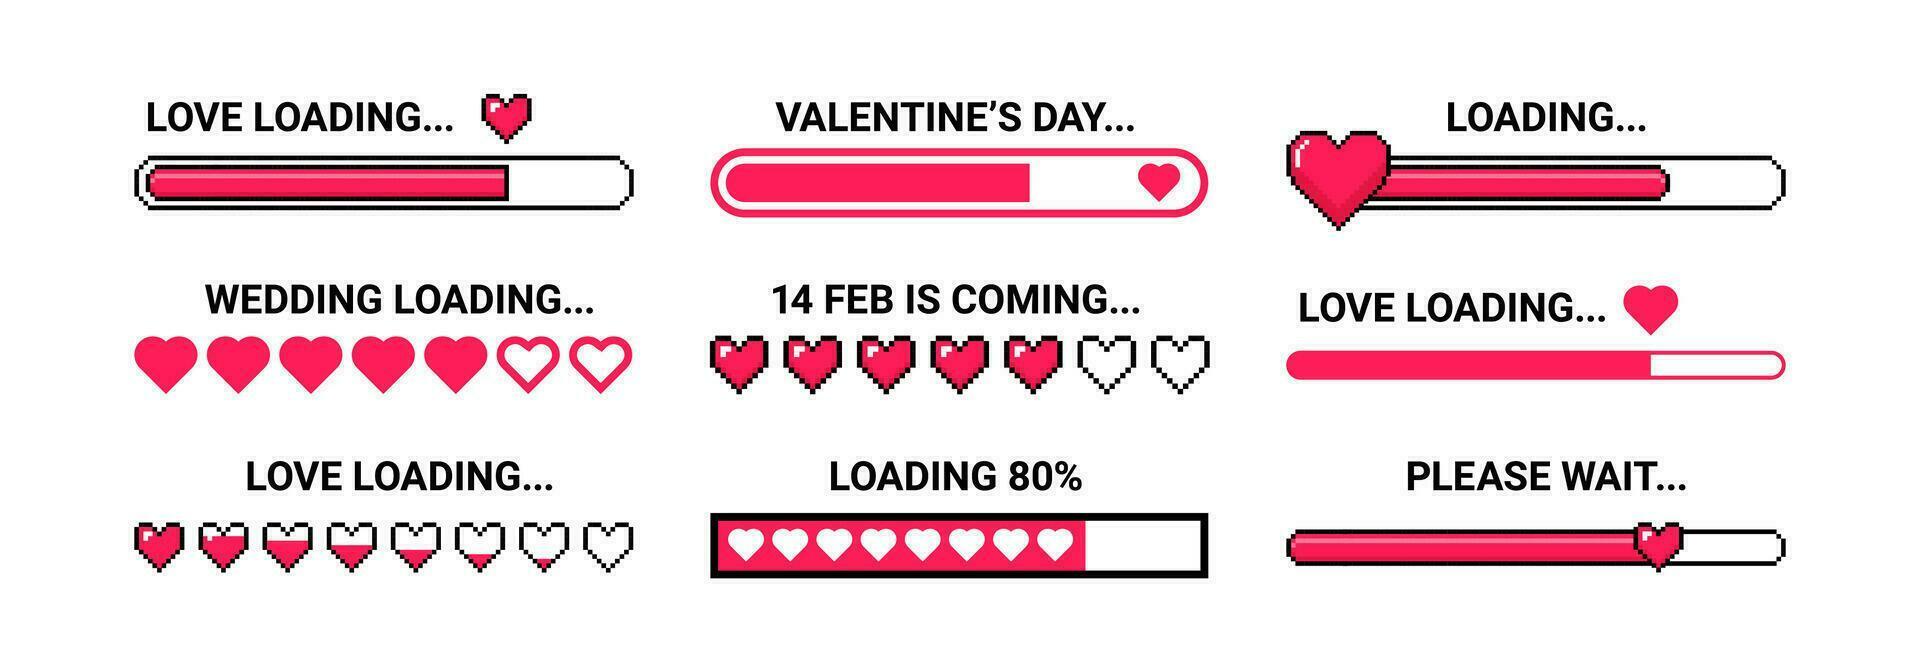 Love loading. Romantic loader with heart icons, happy wedding, valentines day and love concept stickers. Retro 8, 16-bit game pixel art vector set